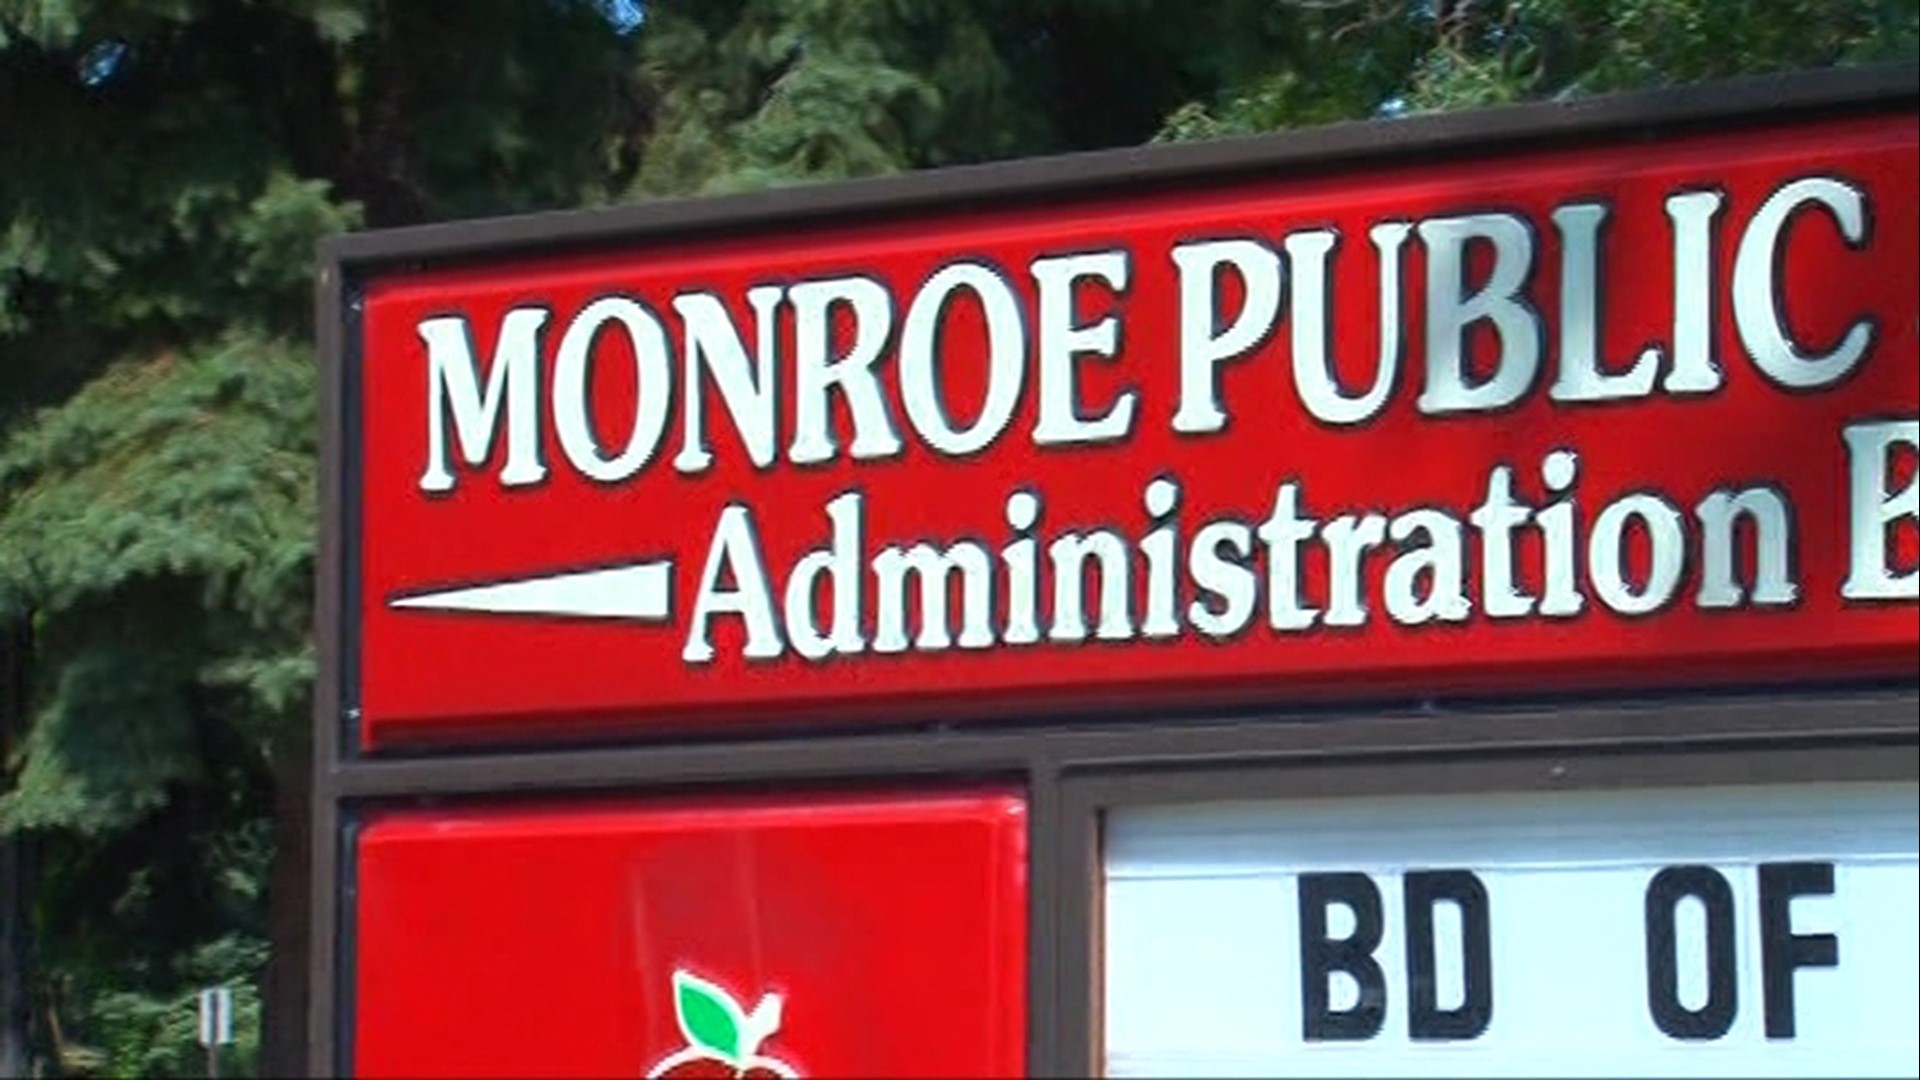 Rumors began in the fall, but no credible evidence was found after two investigations. On June 7, administrators received "evidence that the rumors could be true."